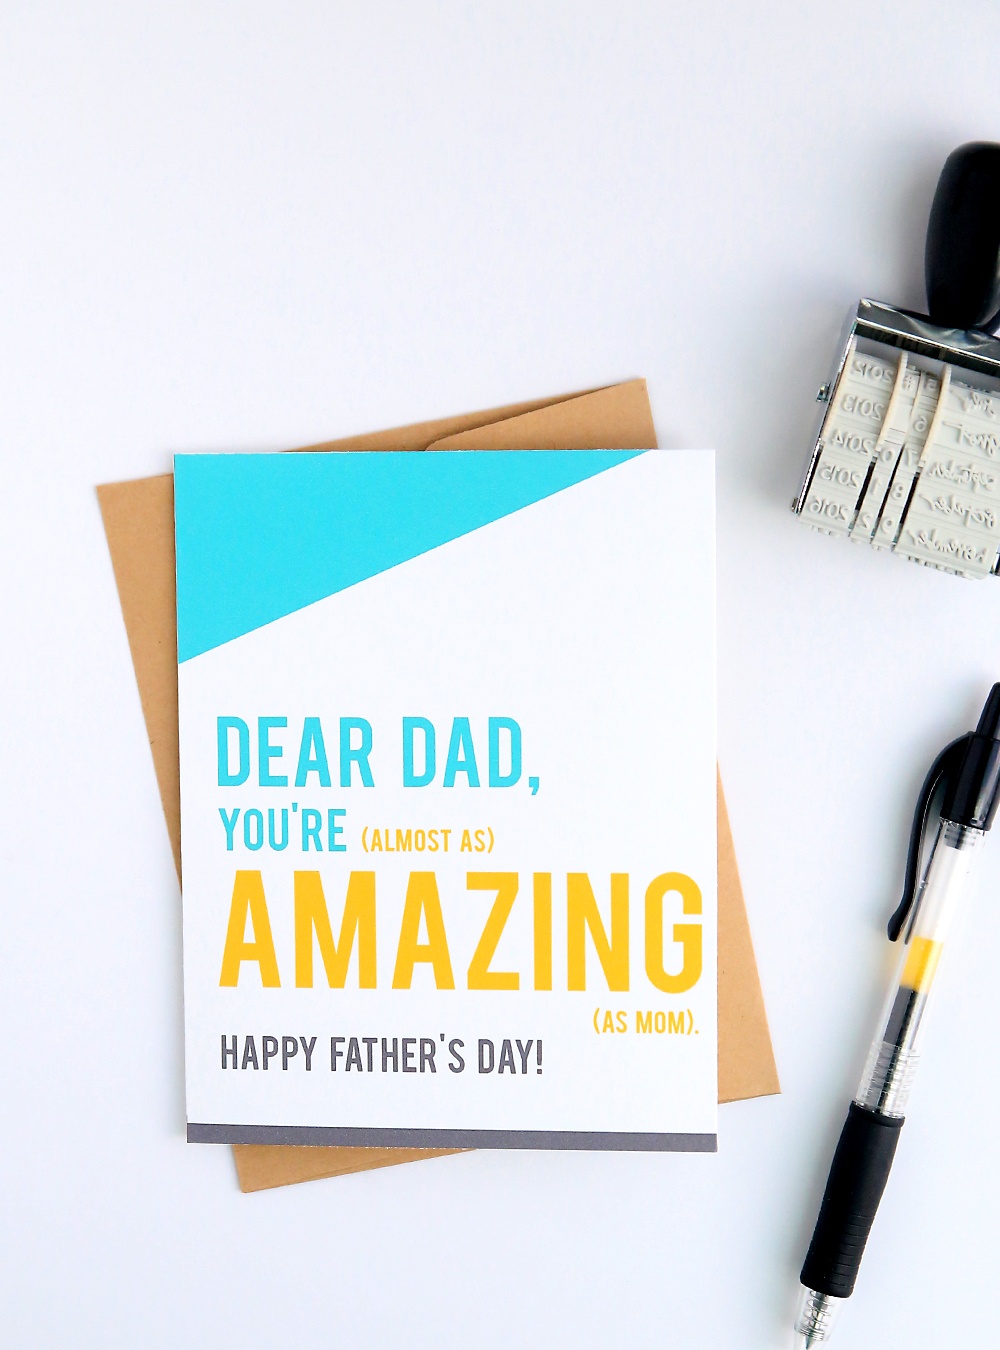 Funny Father&amp;#039;s Day Cards You Can Print At Home - It&amp;#039;s Always Autumn - Free Printable Funny Father&amp;amp;#039;s Day Cards